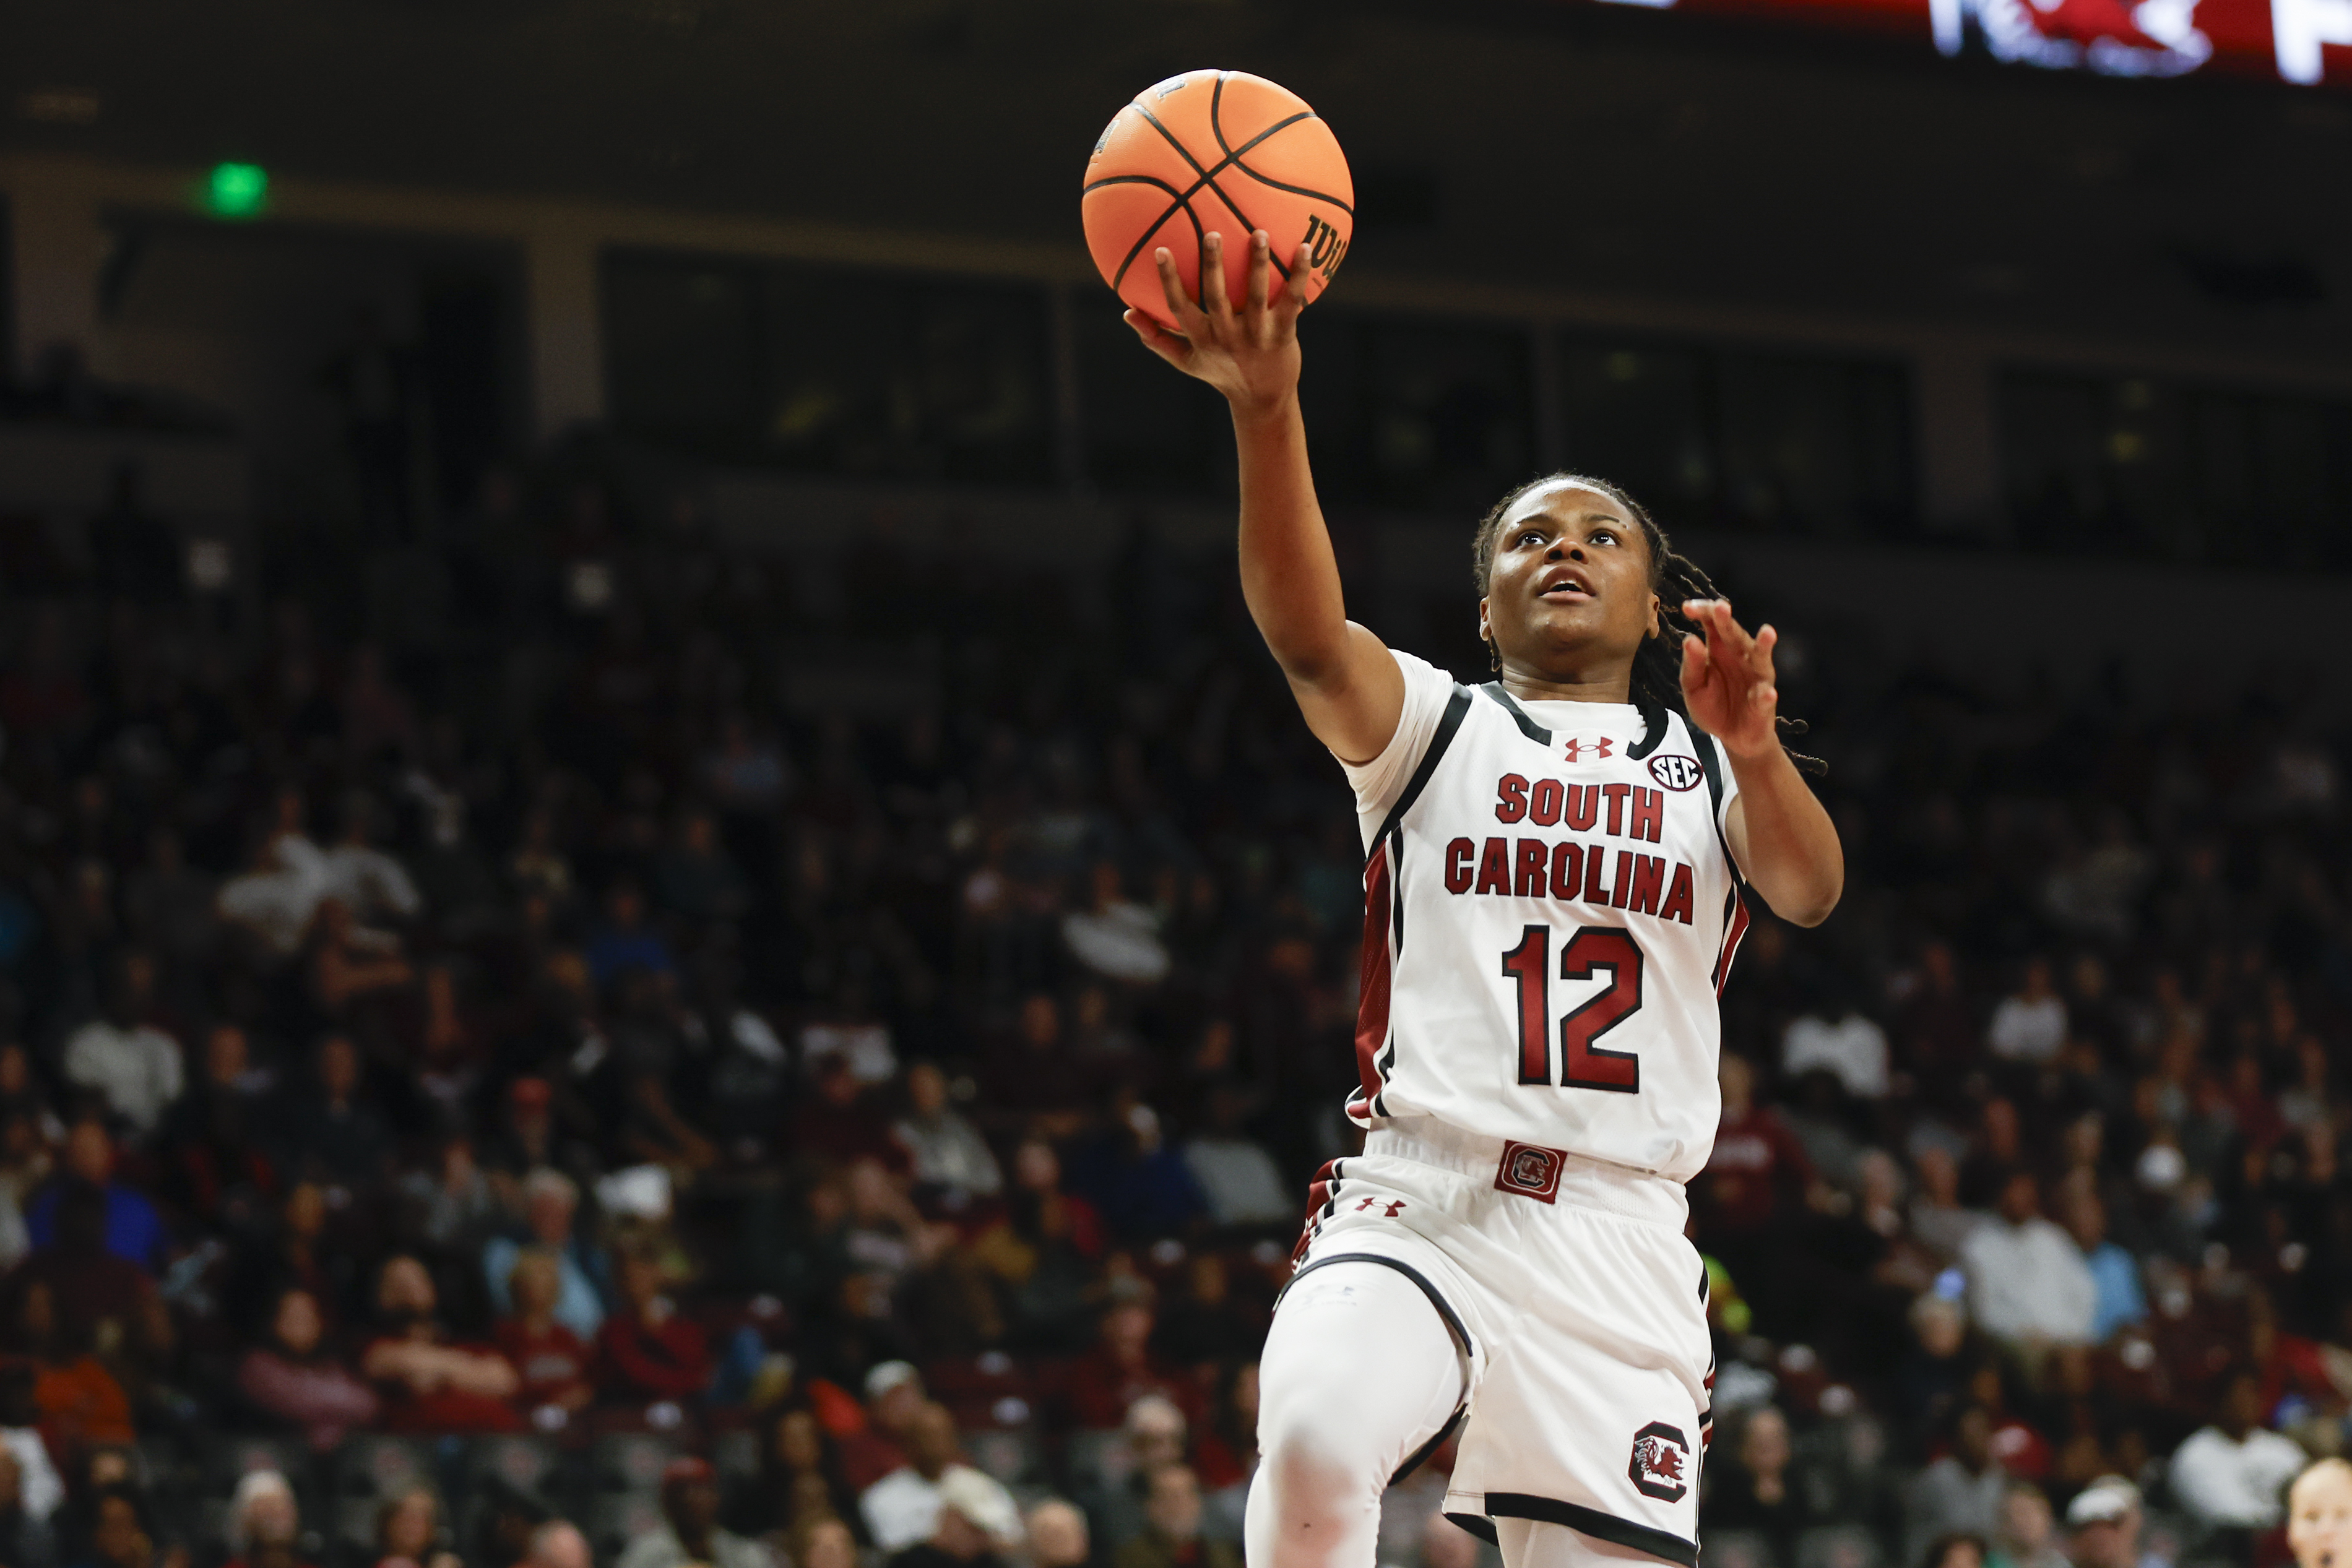 South Carolina guard MiLaysia Fulwiley drives for a layup against Mississippi Valley State during the second half of an NCAA college basketball game in Columbia, S.C., Friday, Nov. 24, 2023. South Carolina won 101-19. (AP Photo/Nell Redmond)